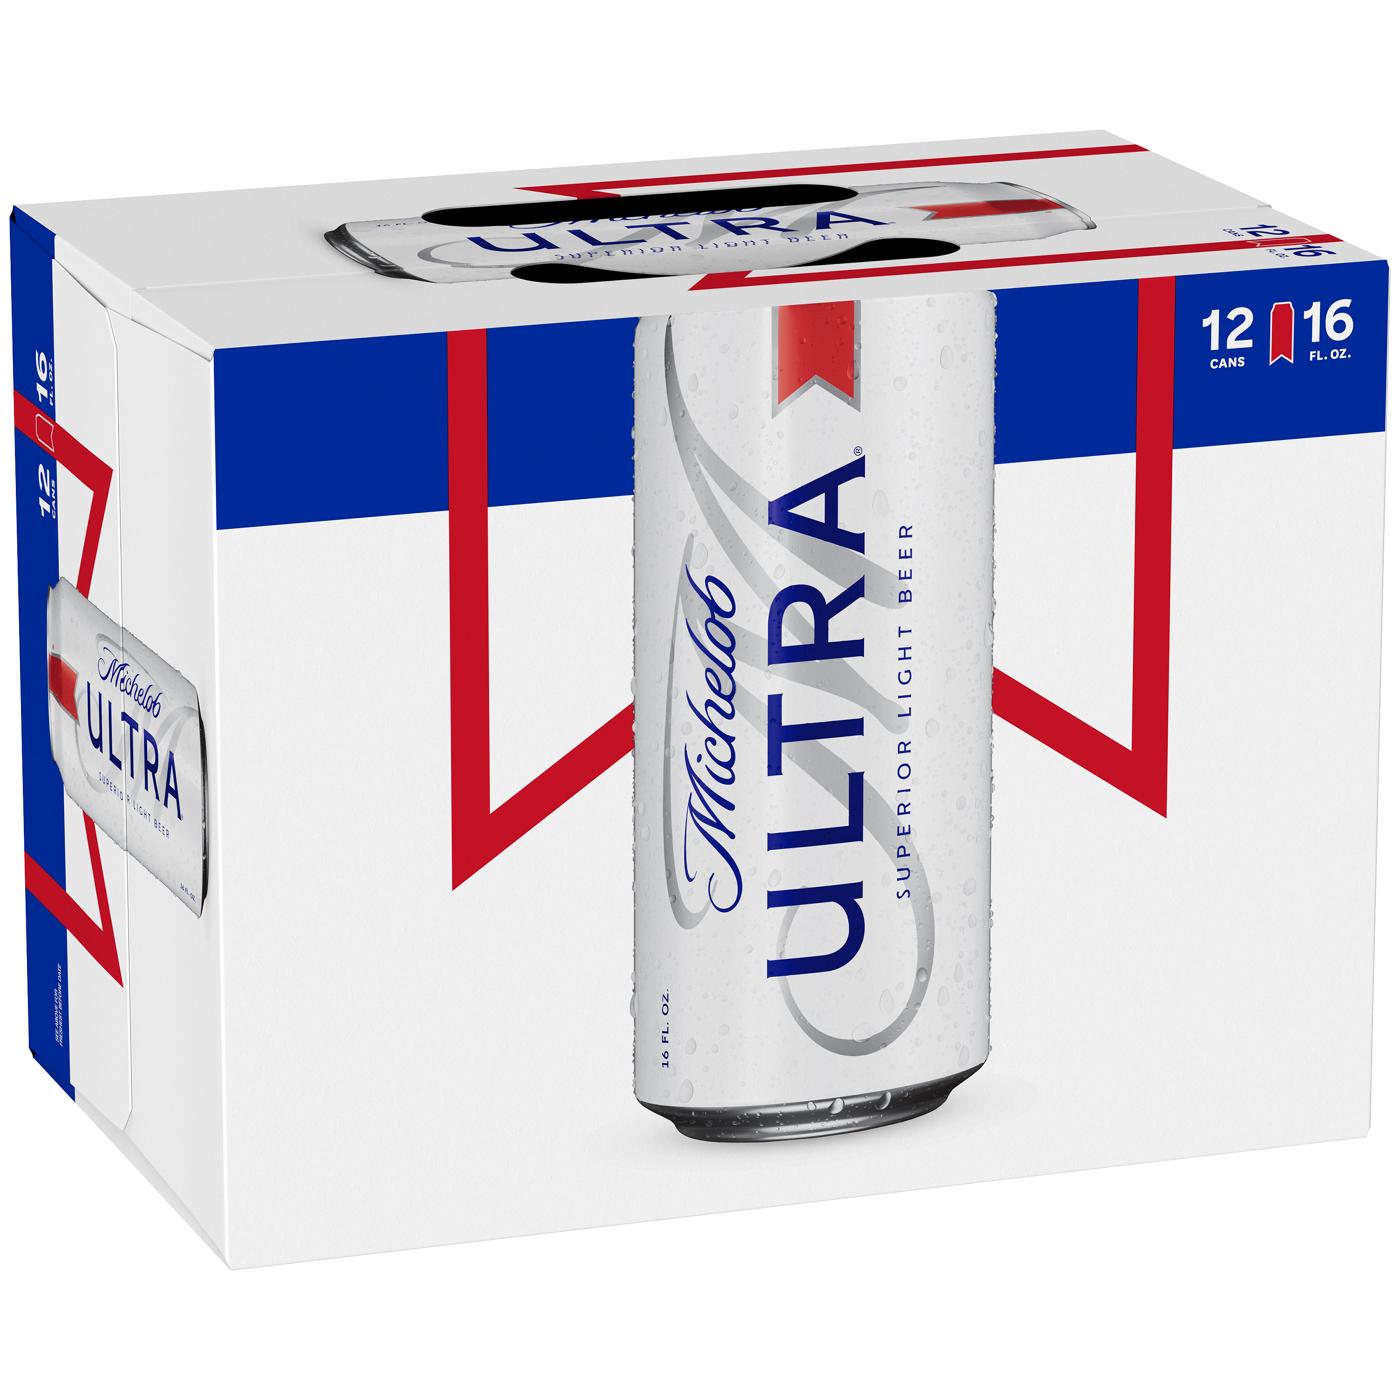 Michelob Ultra Beer 16 oz Cans; image 1 of 2